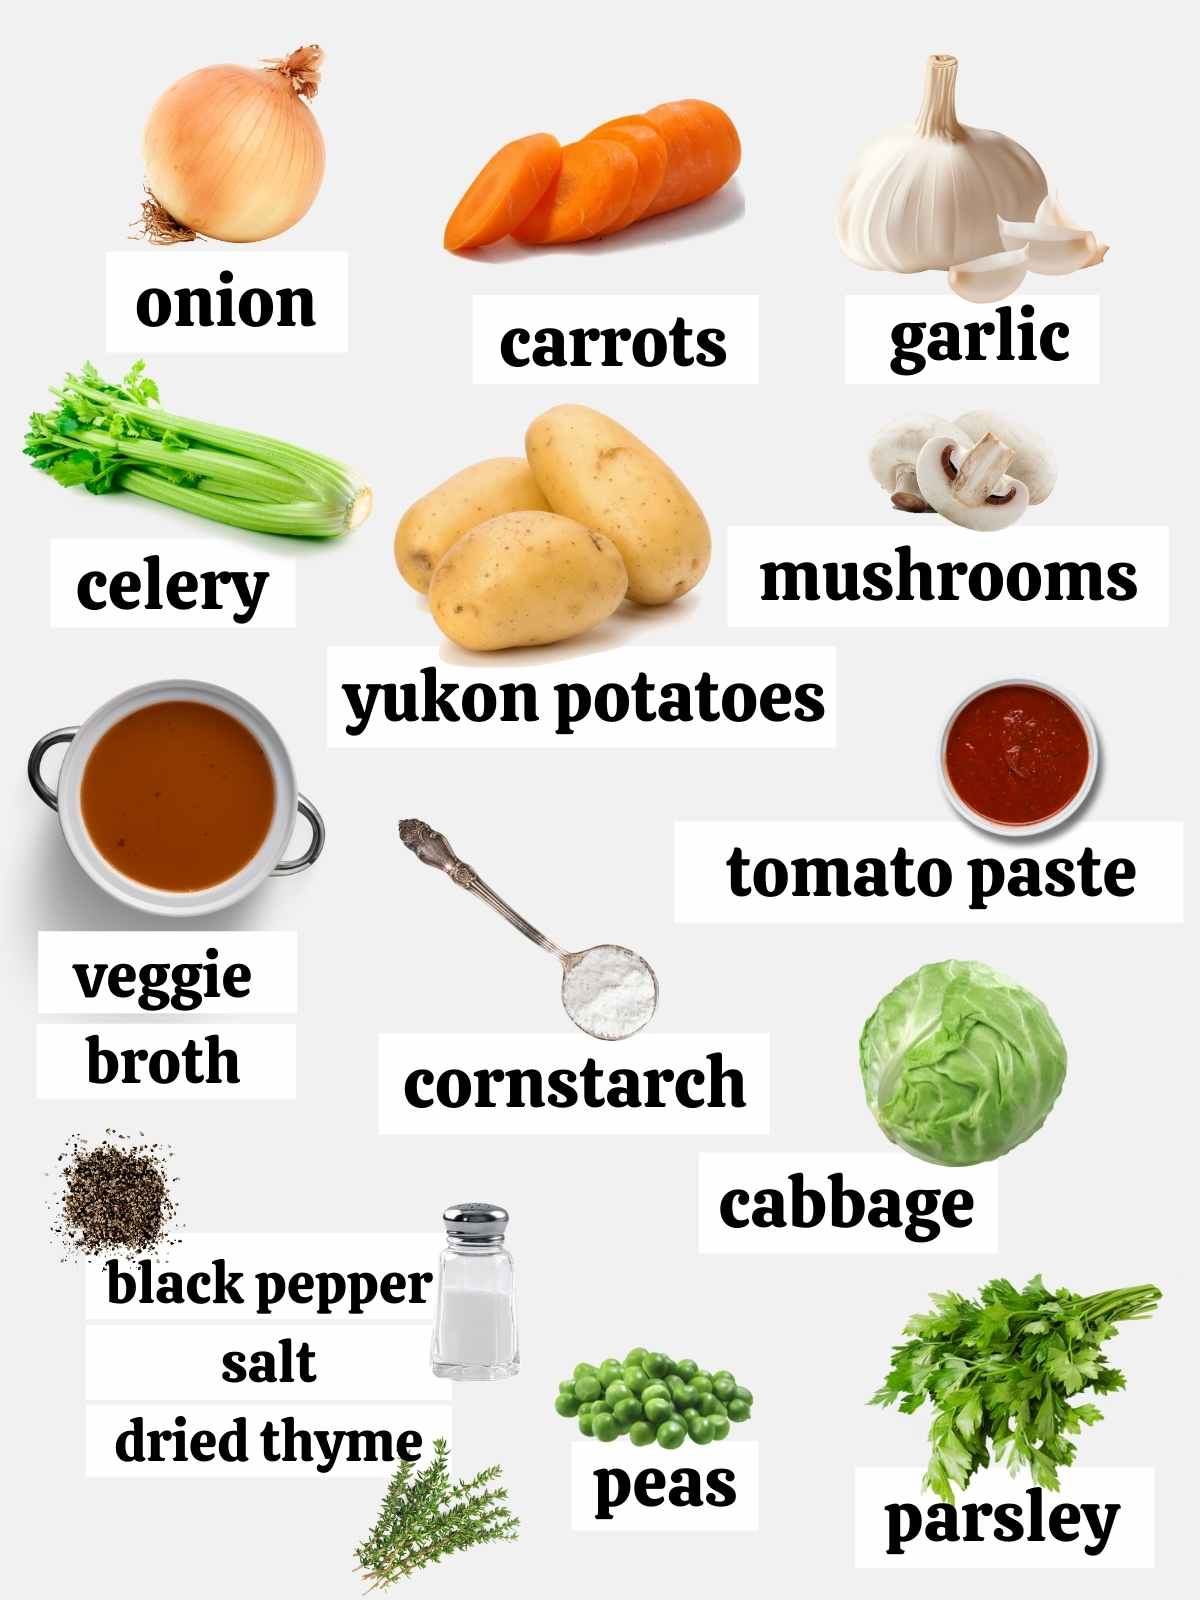 Graphics of ingredients with labels of what they are.